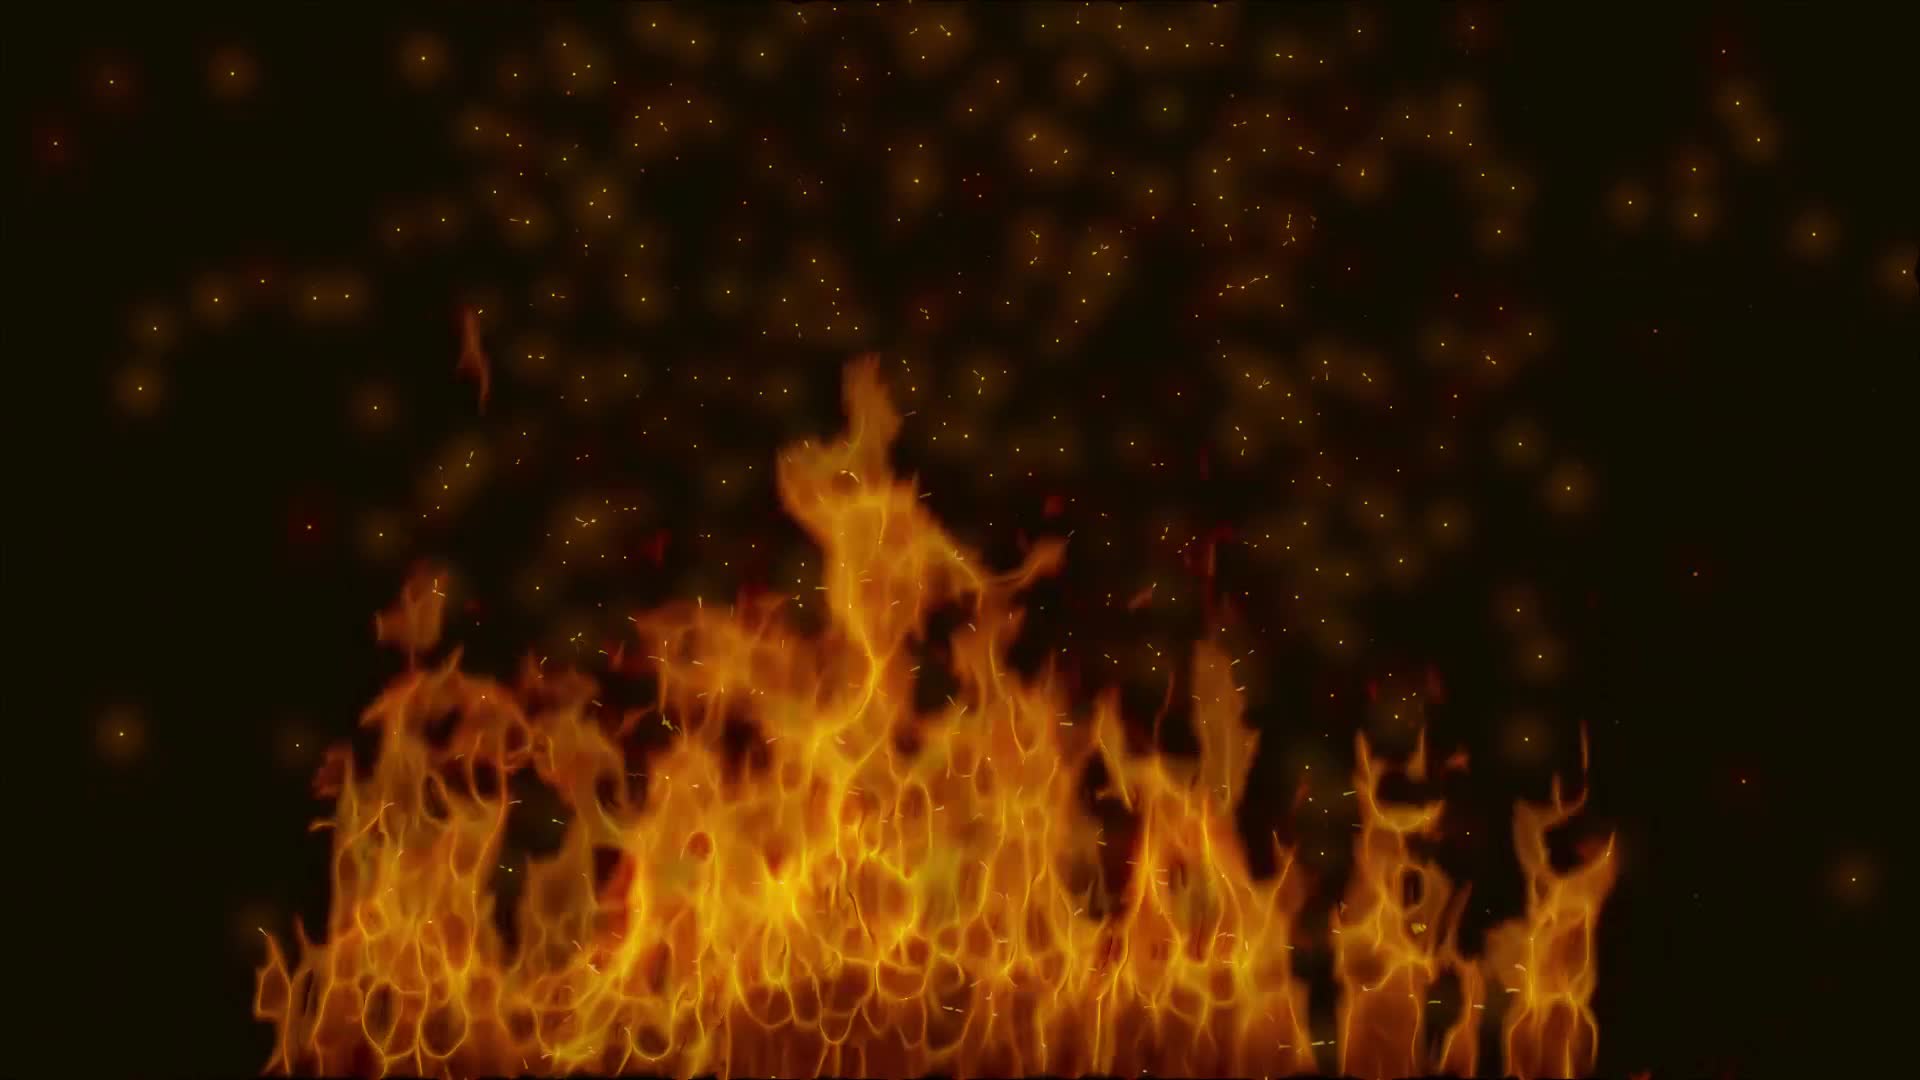 Fire Animation Stock Video Footage for Free Download